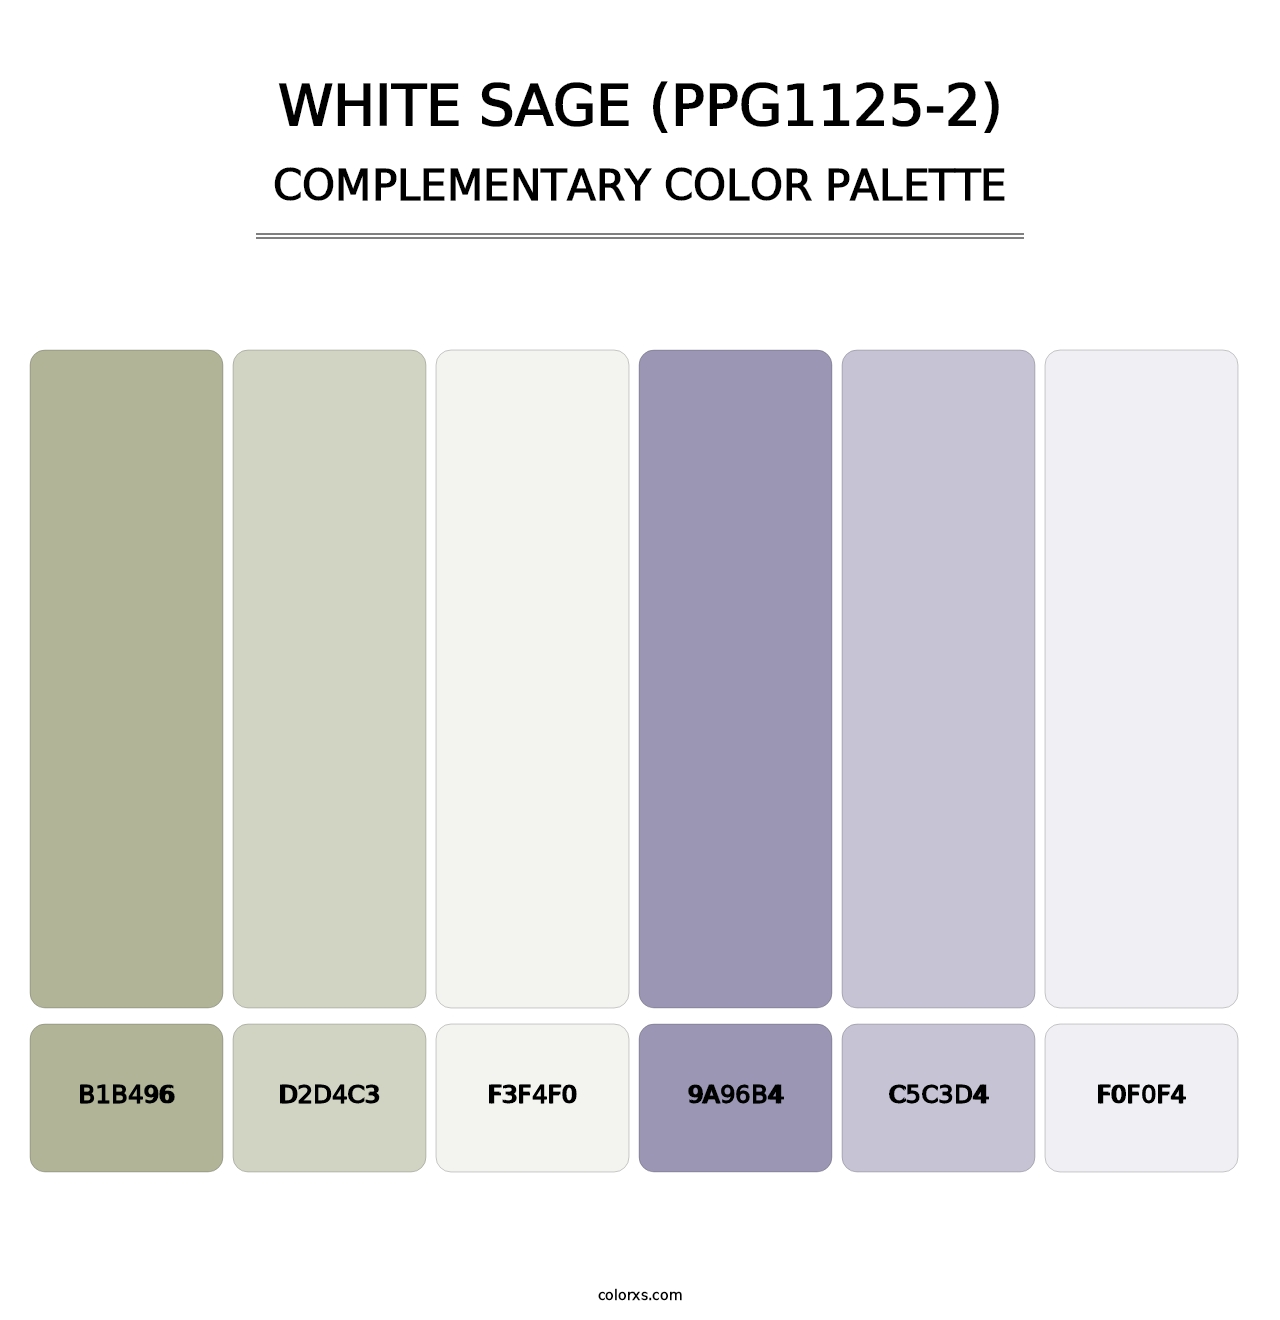 White Sage (PPG1125-2) - Complementary Color Palette